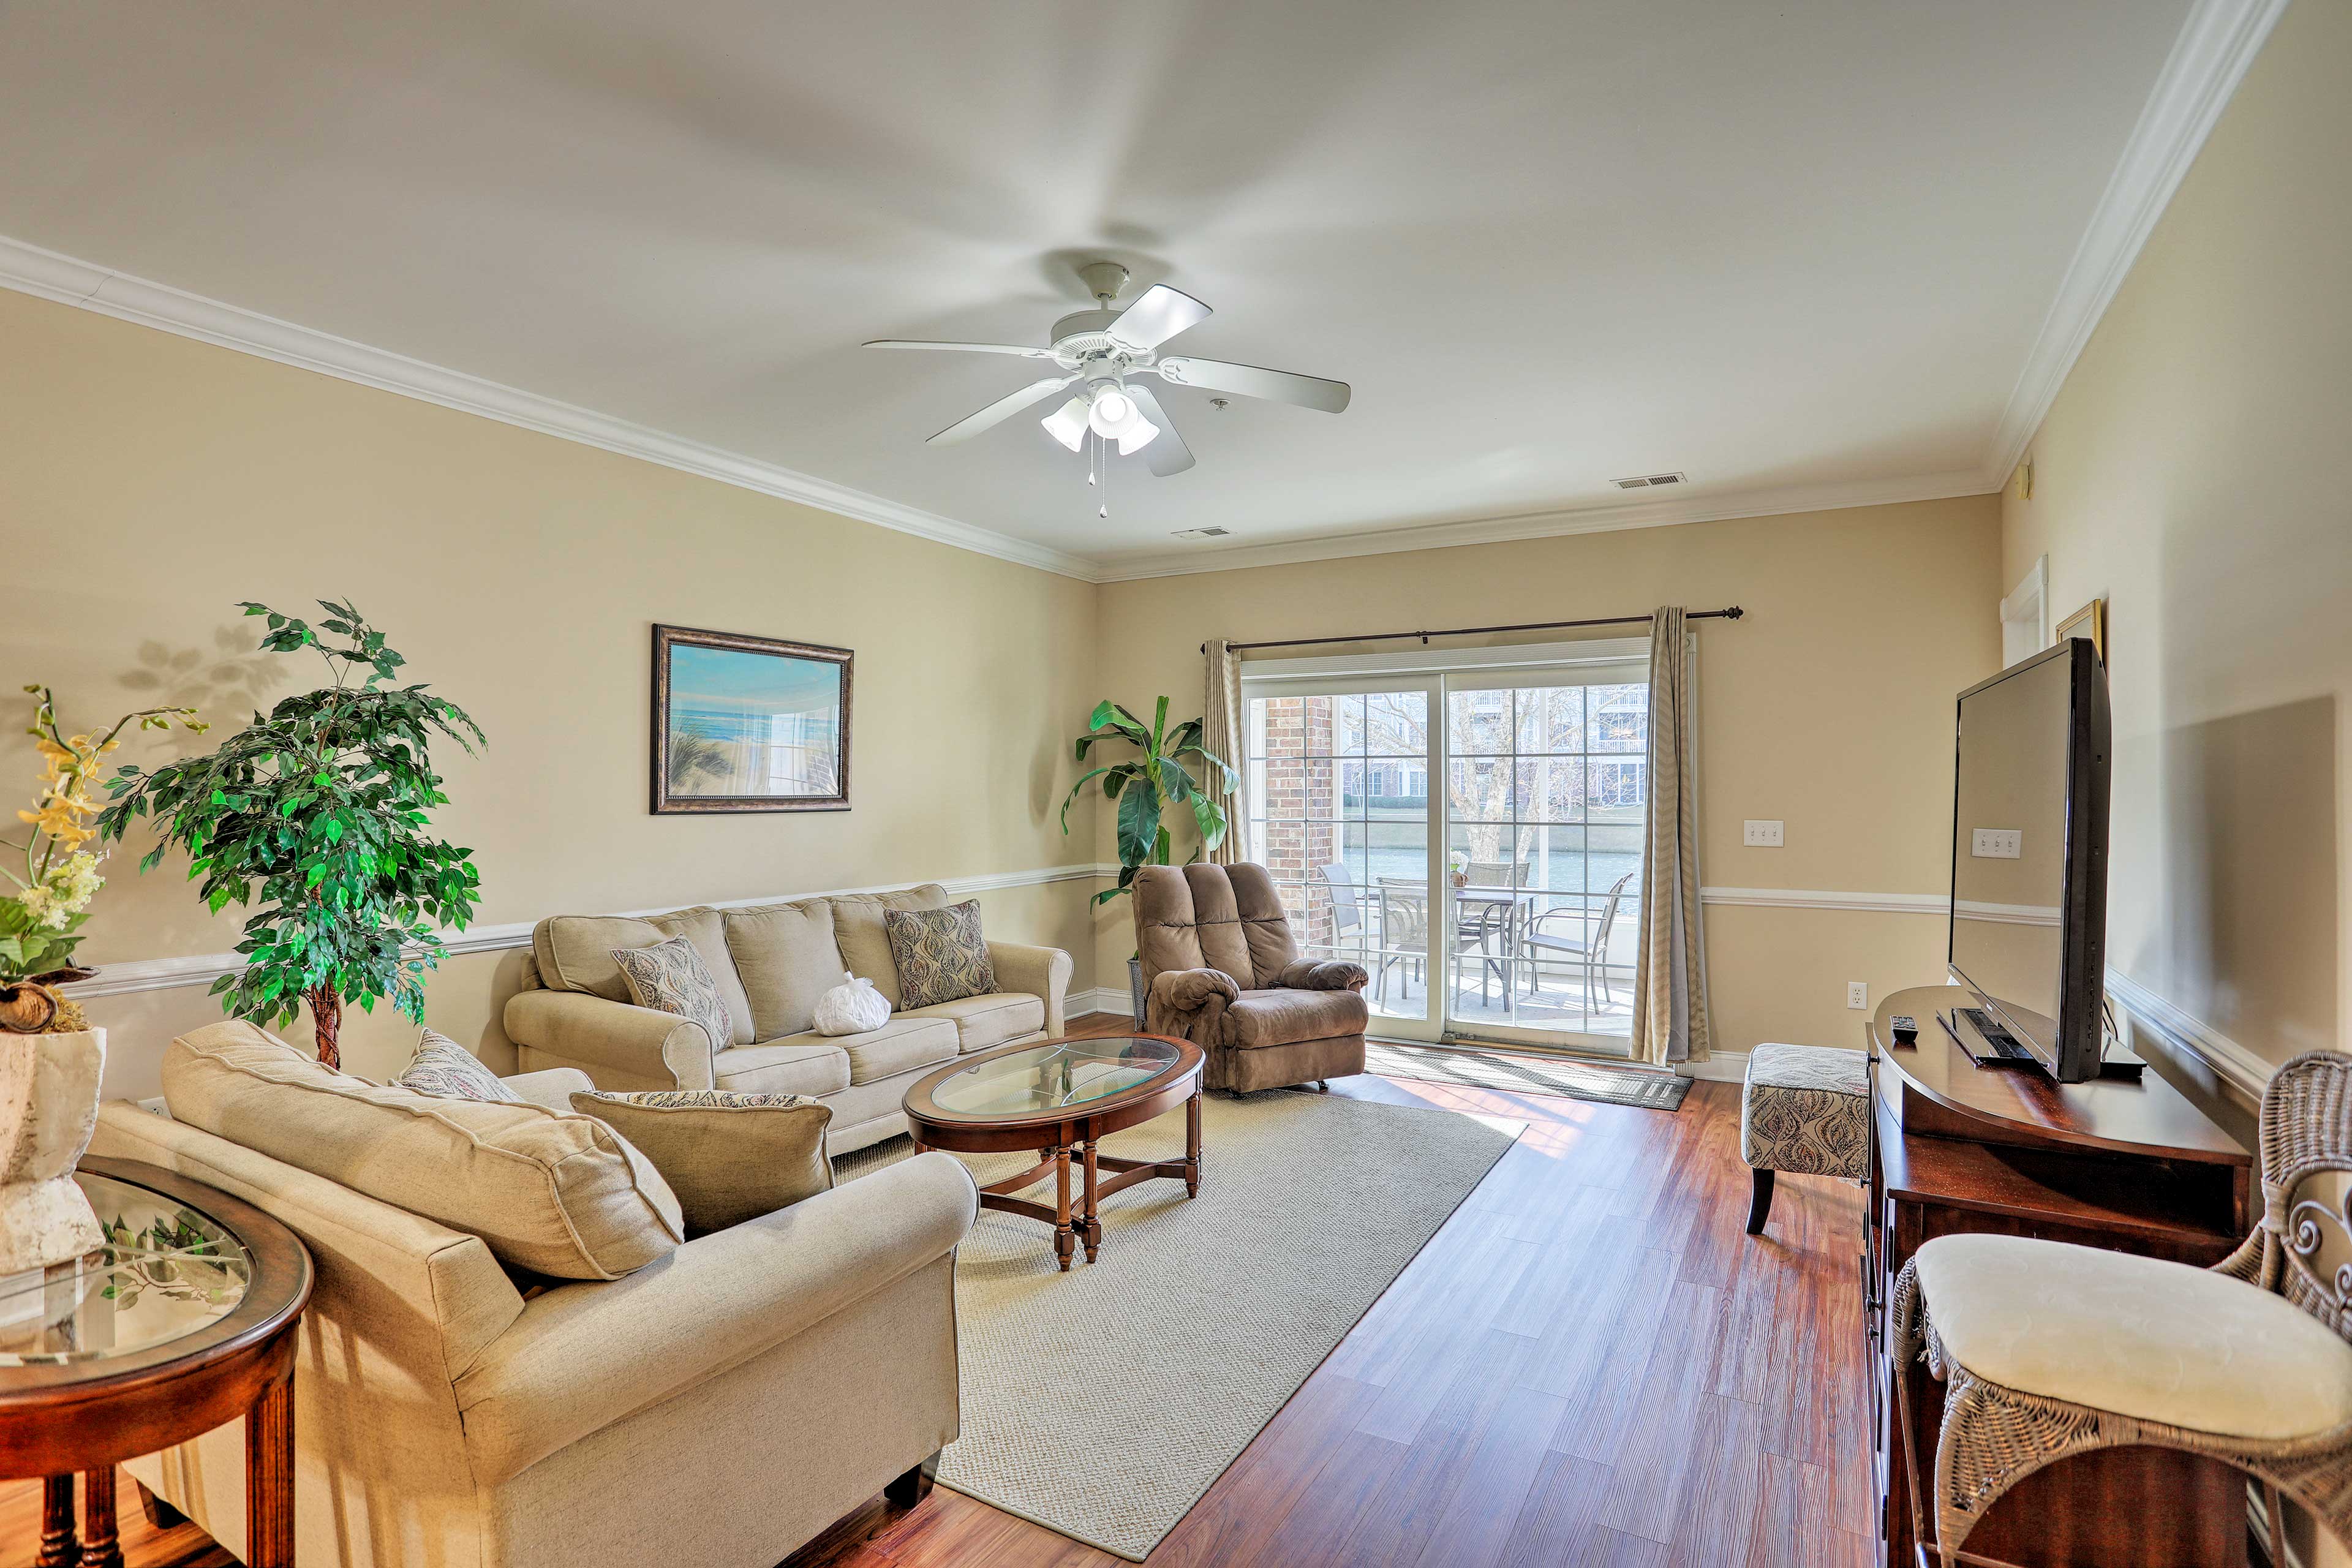 Myrtle Beach Vacation Rental | 3BR | 2BA | 1,500 Sq Ft | Step-Free Access